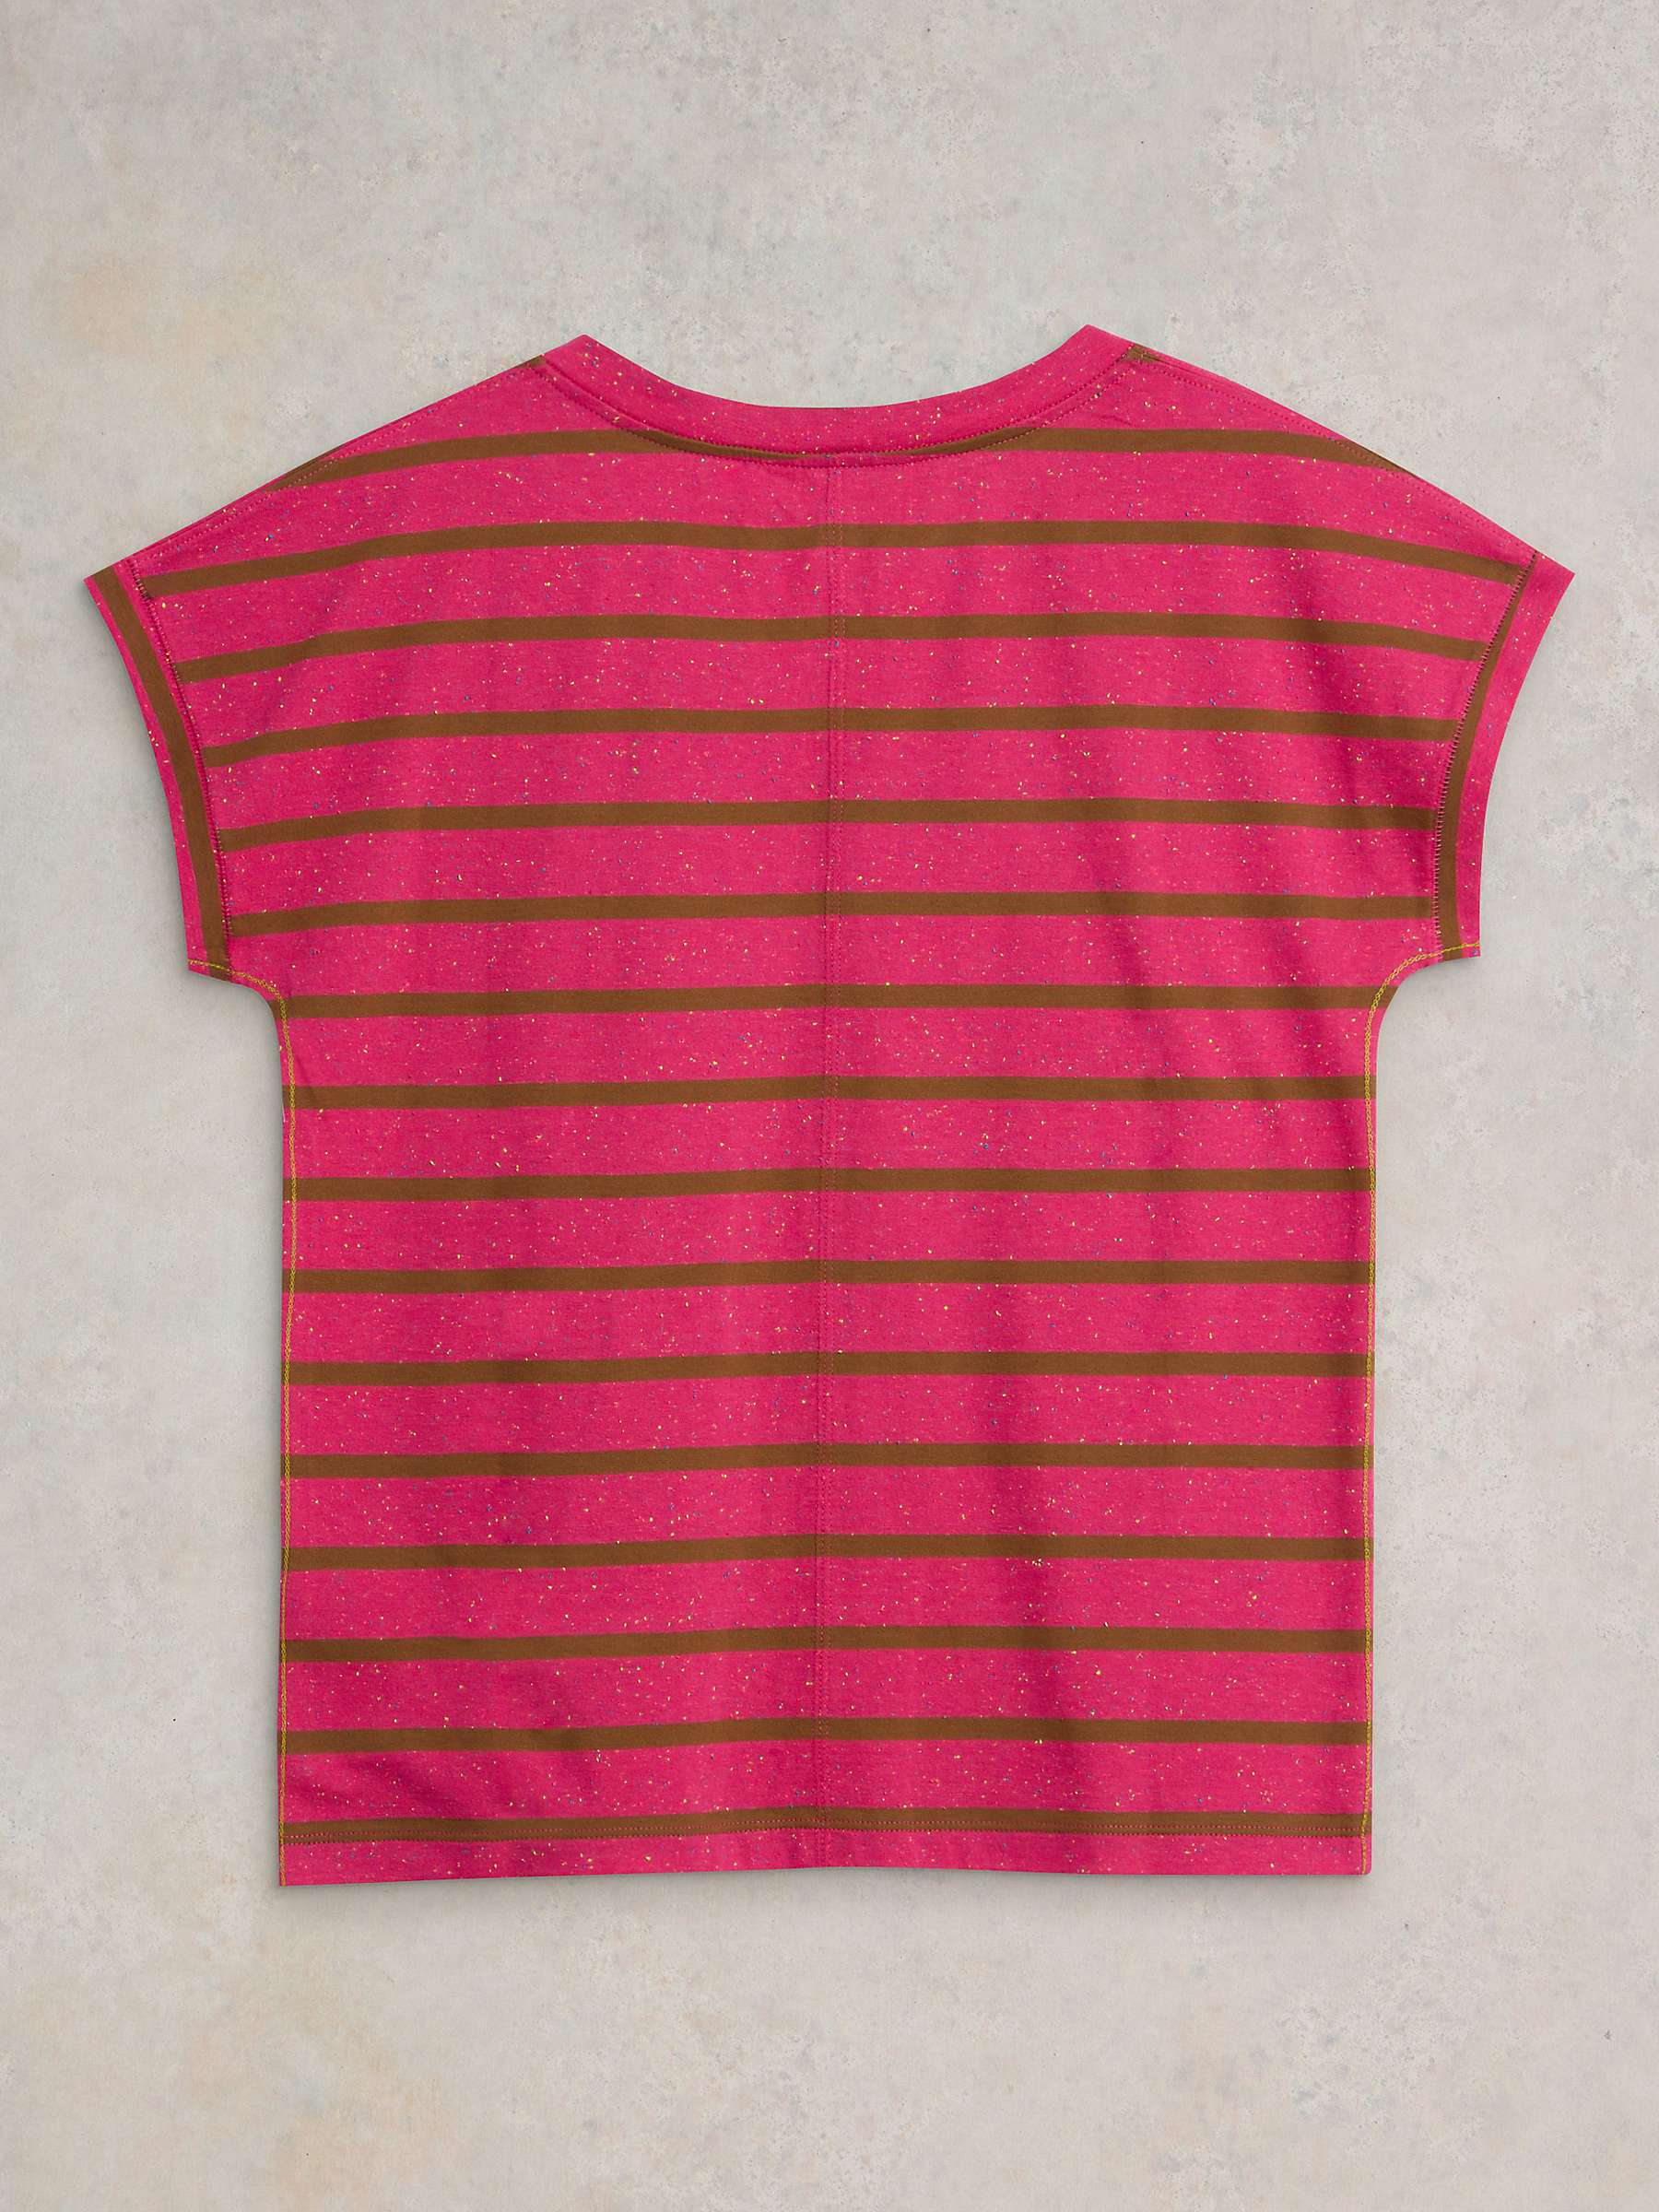 Buy White Stuff Nelly Notch Printed T-Shirt, Pink/Multi Online at johnlewis.com